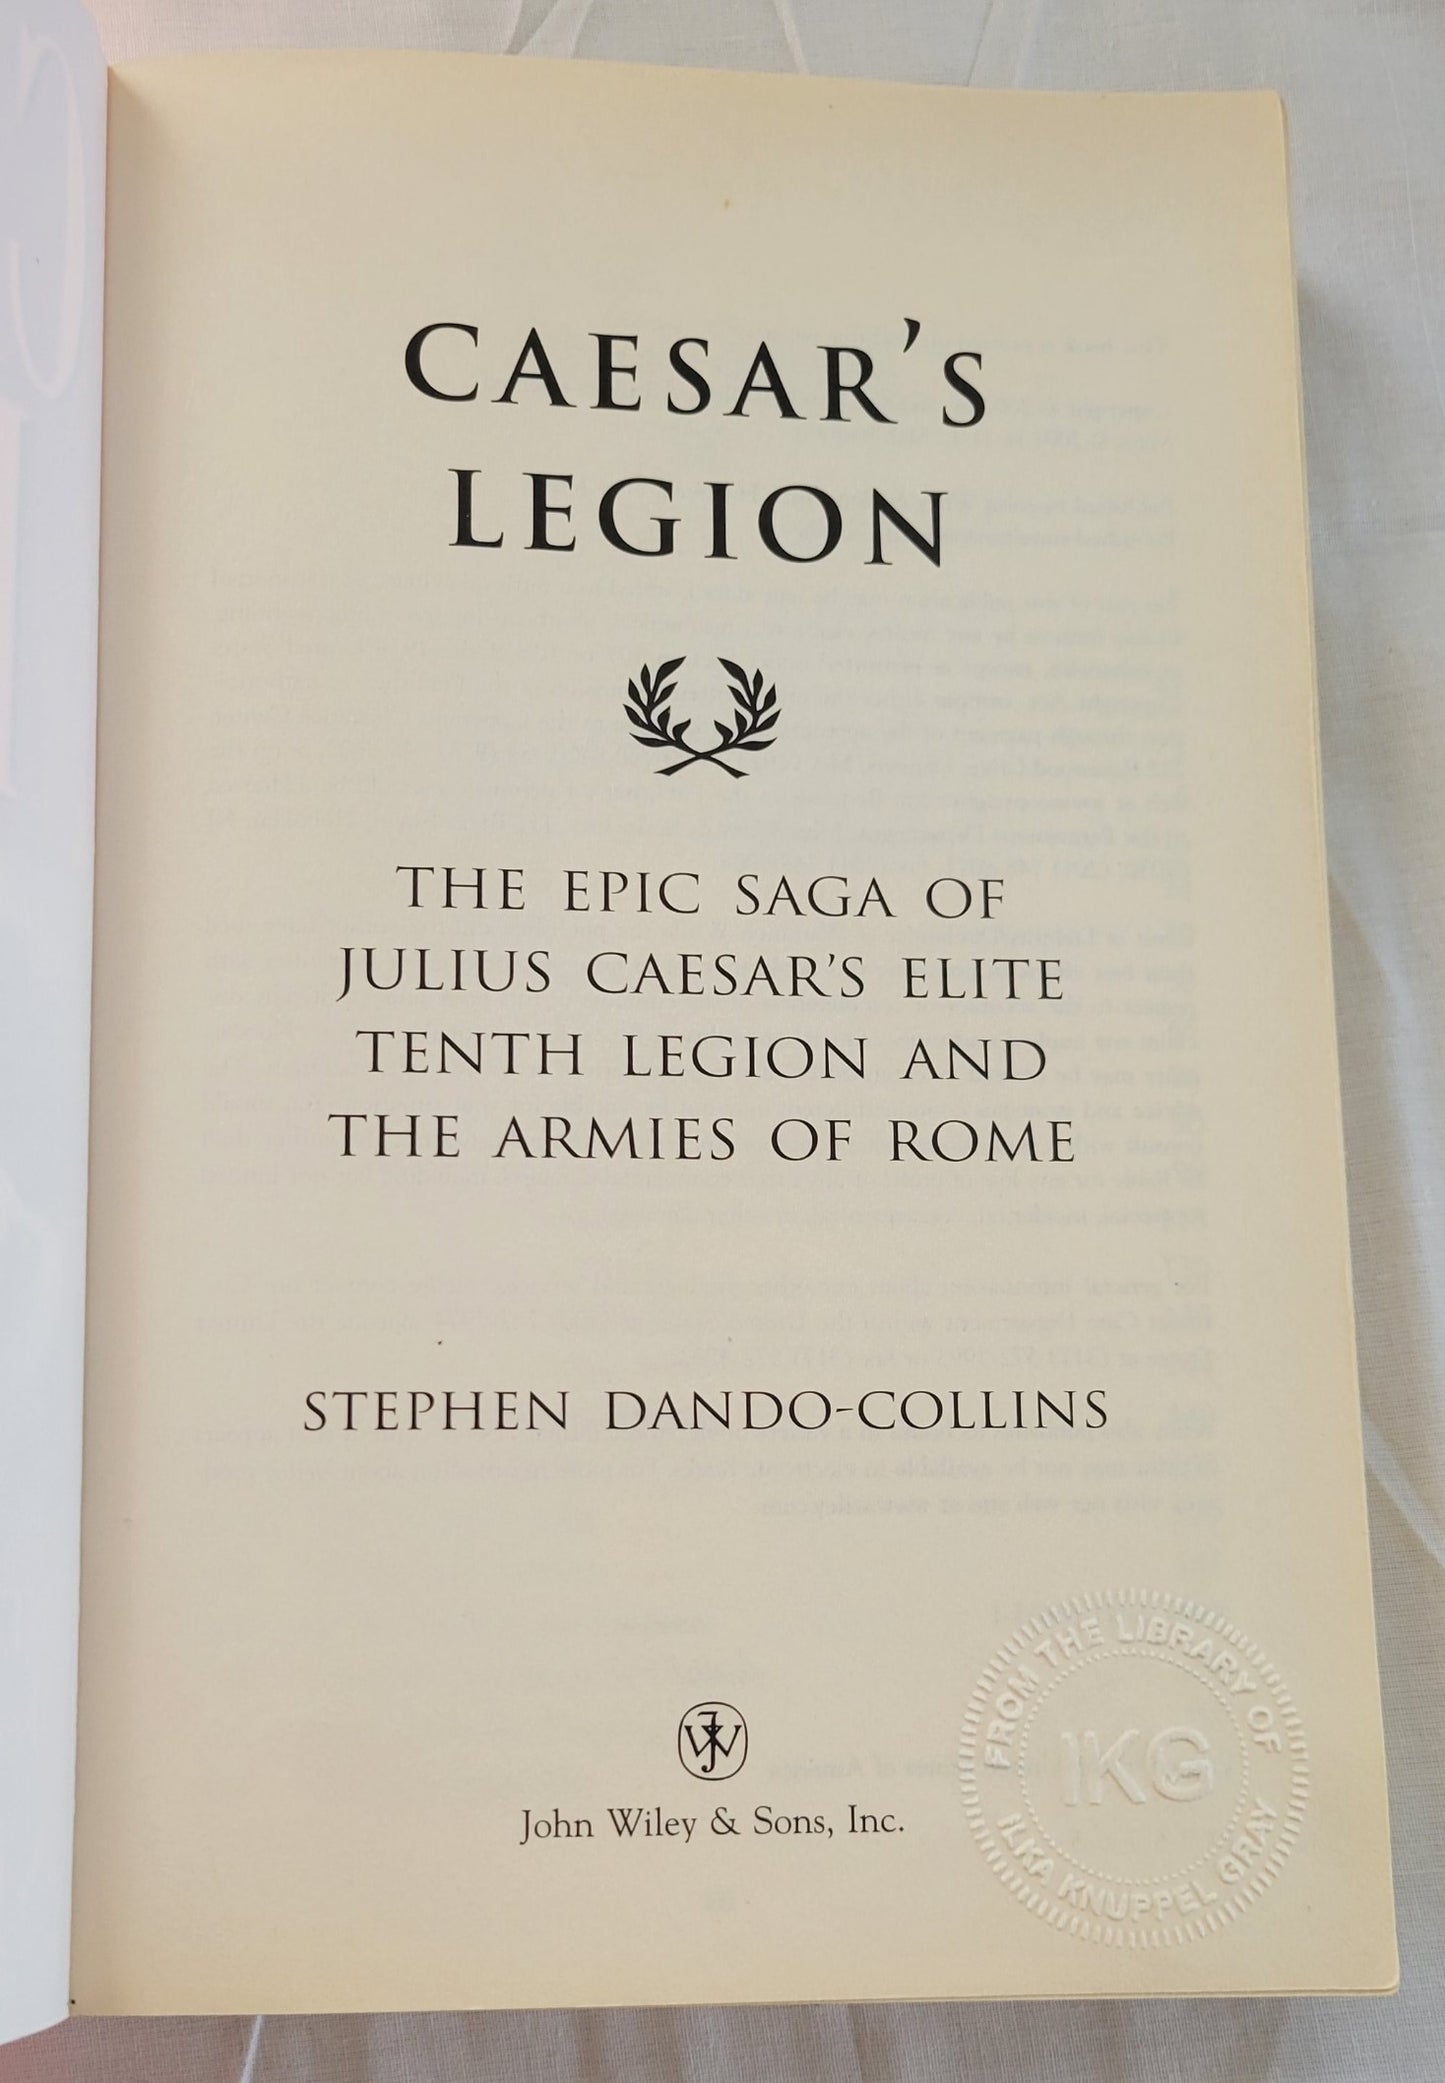 Caesar’s Legion: The Epic Saga of Julius Caesar’s Elite Tenth Legion and the Armies of Rome used book written by Stephen Dando-Collins, published by John Wiley & Sons, Inc. View of inside title page.